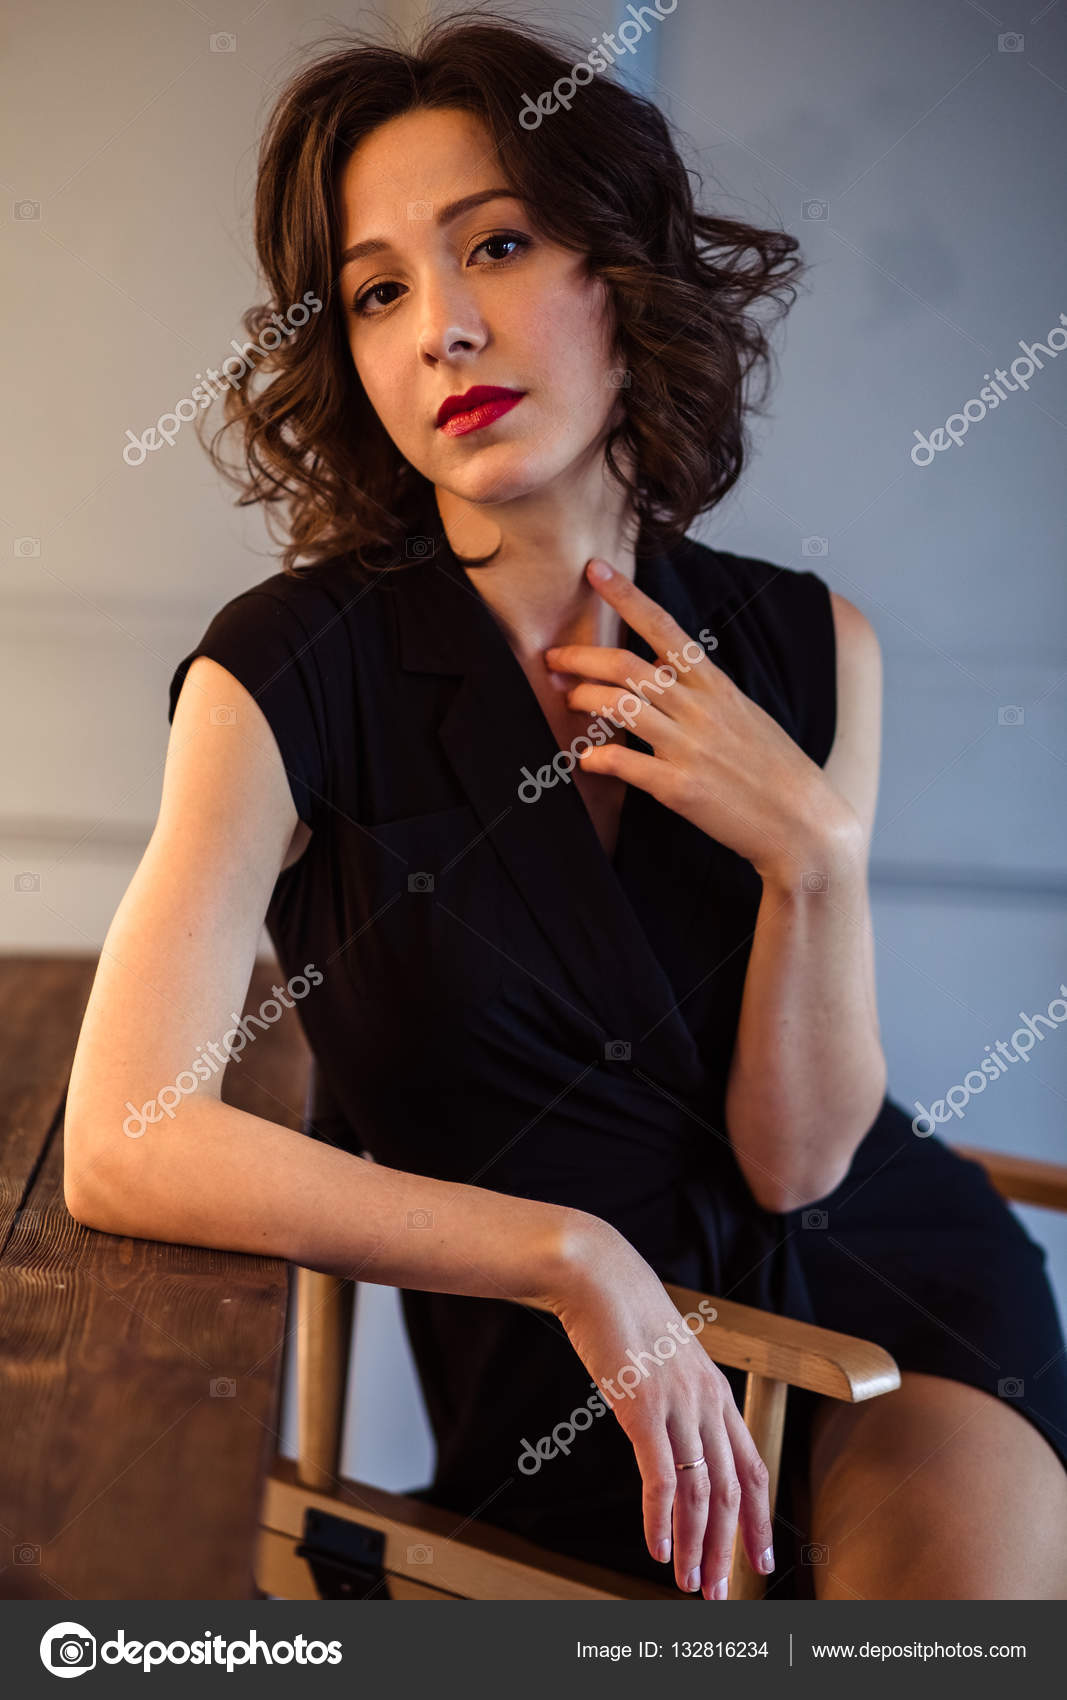 Tender Young Woman In A Black Dress With Natural Makeup And